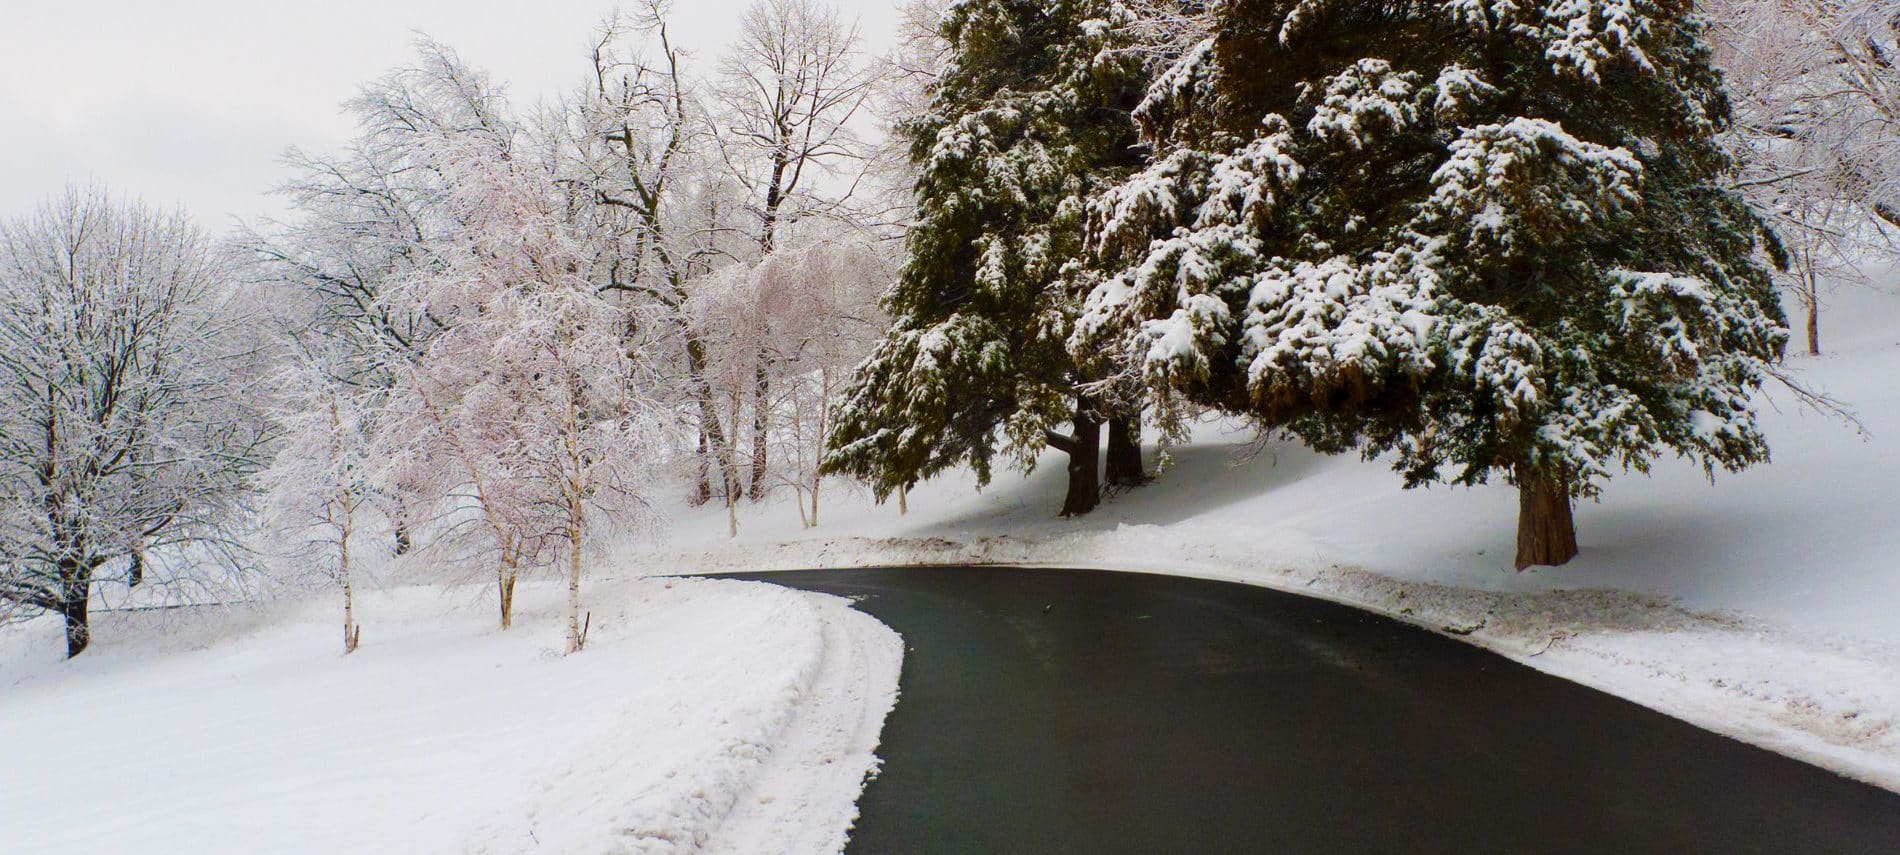 A wintry road in Hudson Valley, NY